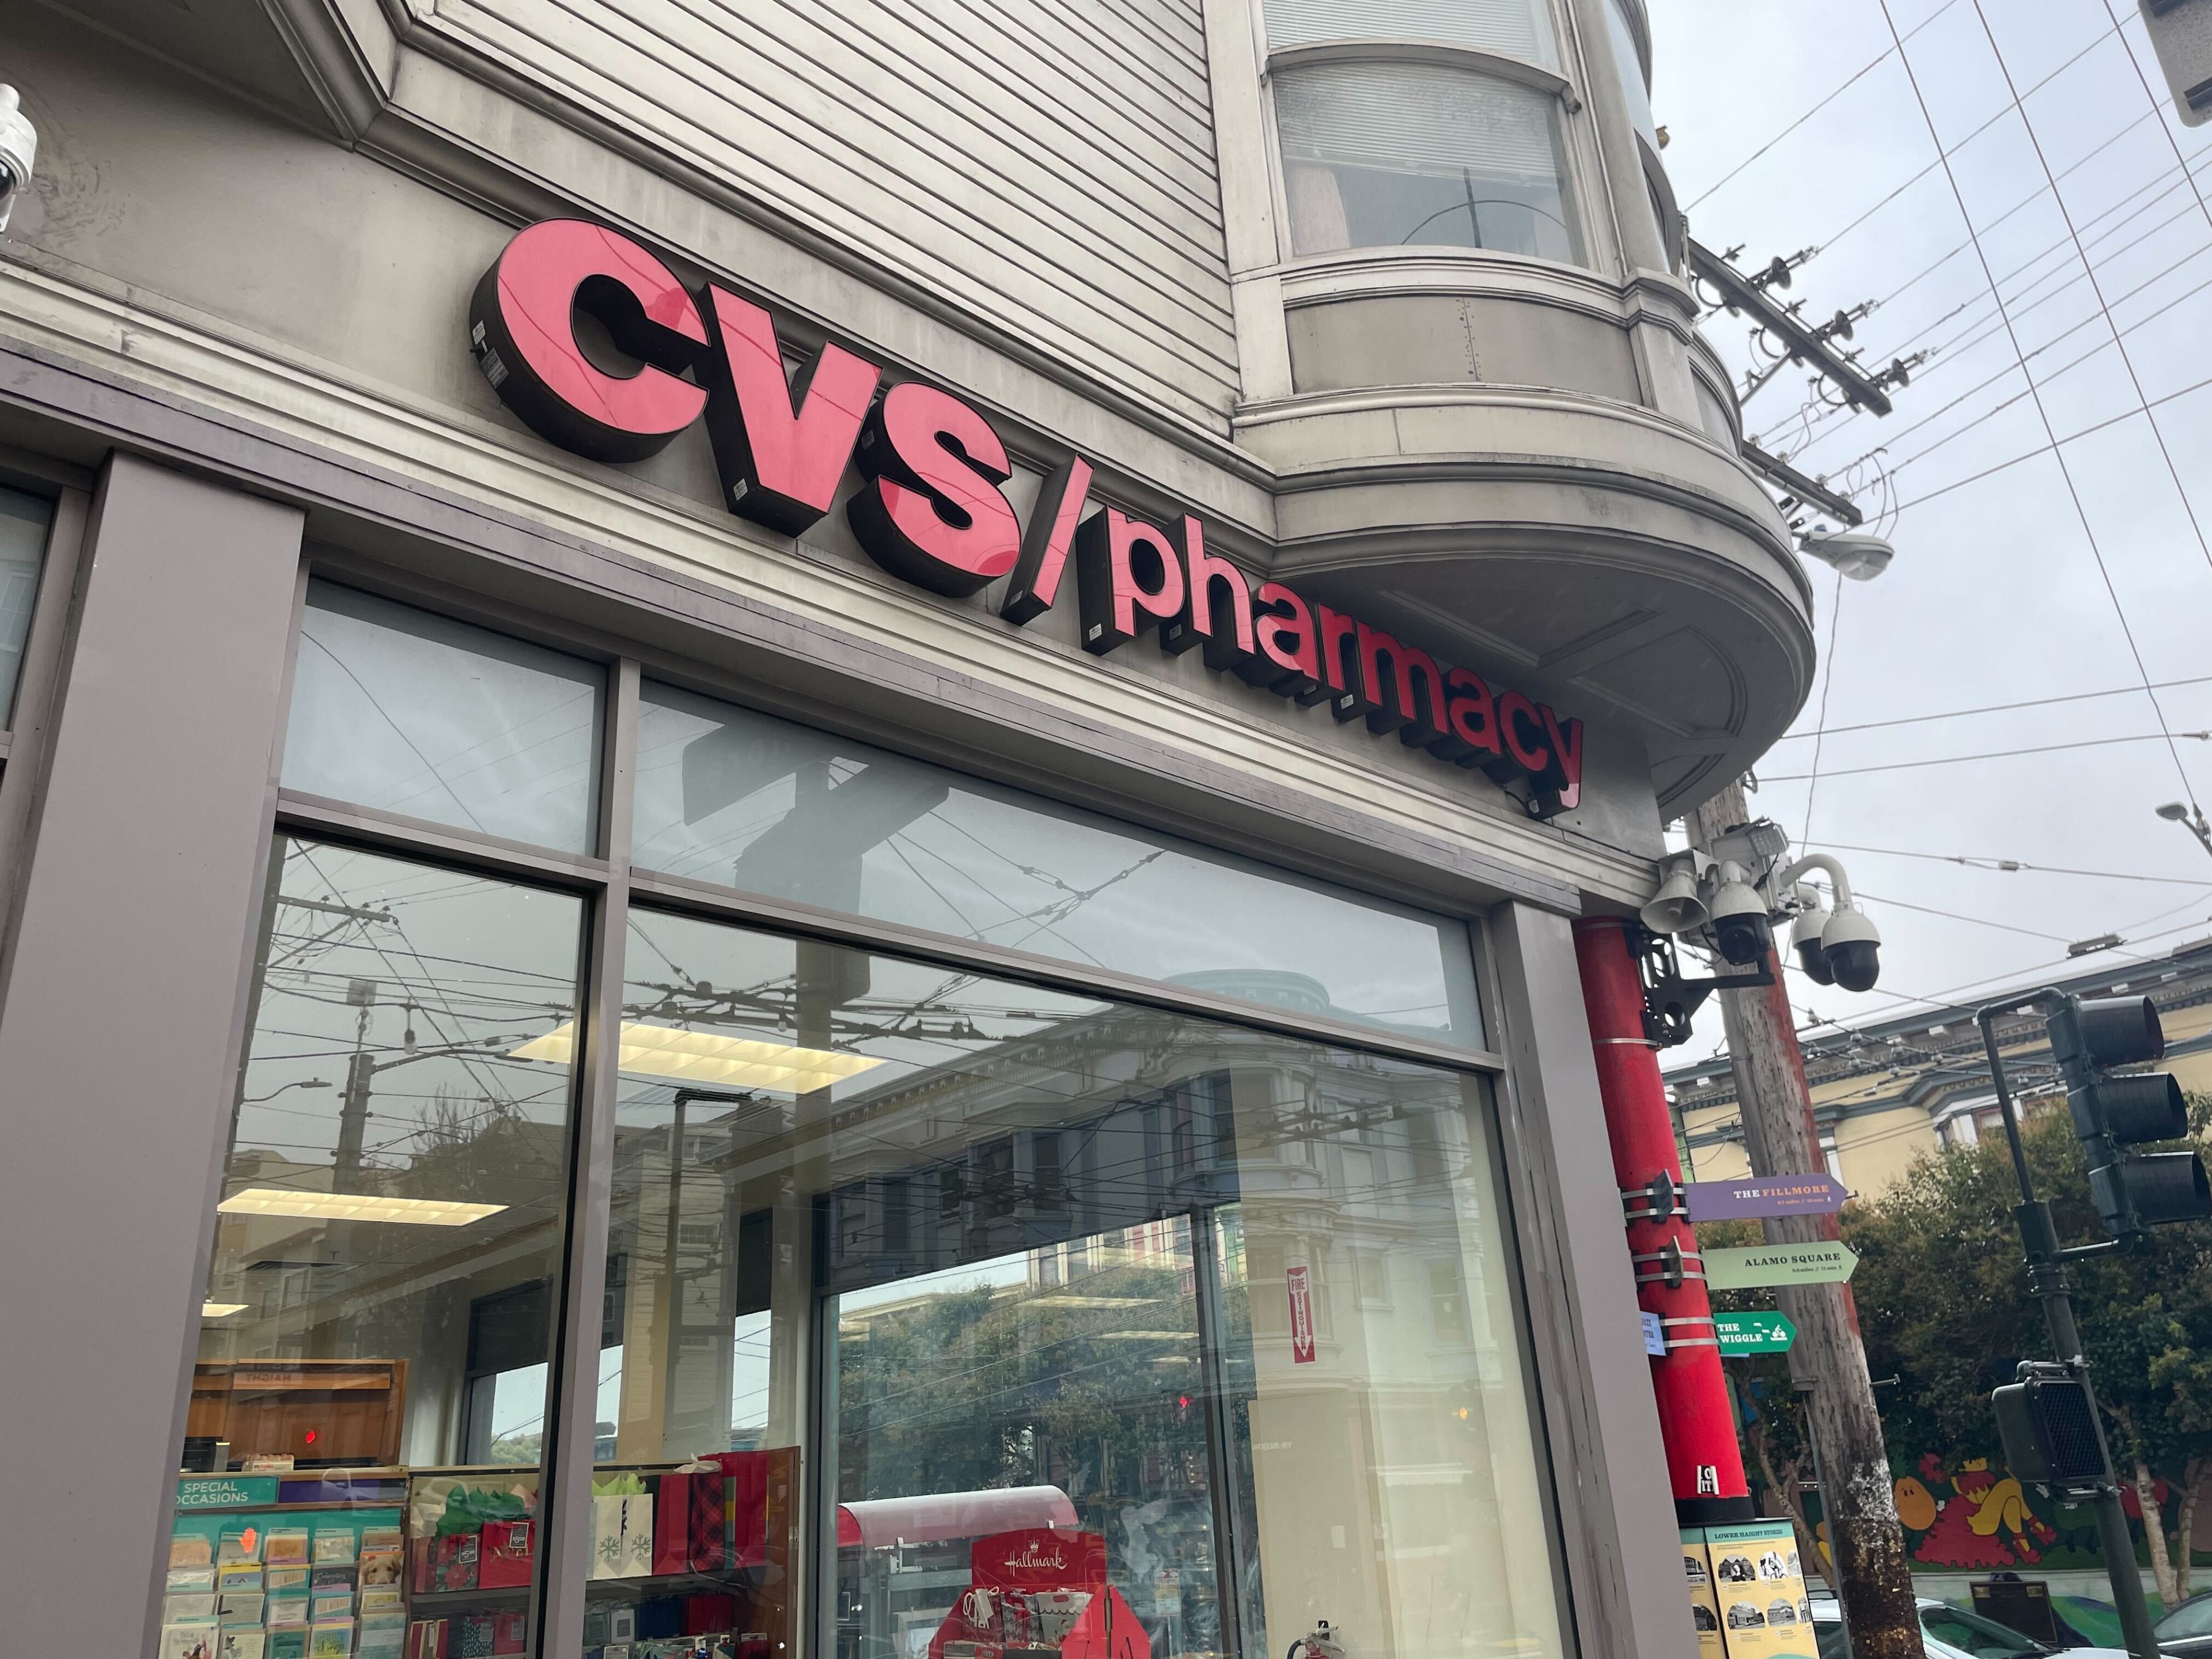 A red CVS/pharmacy sign affixed to a corner building